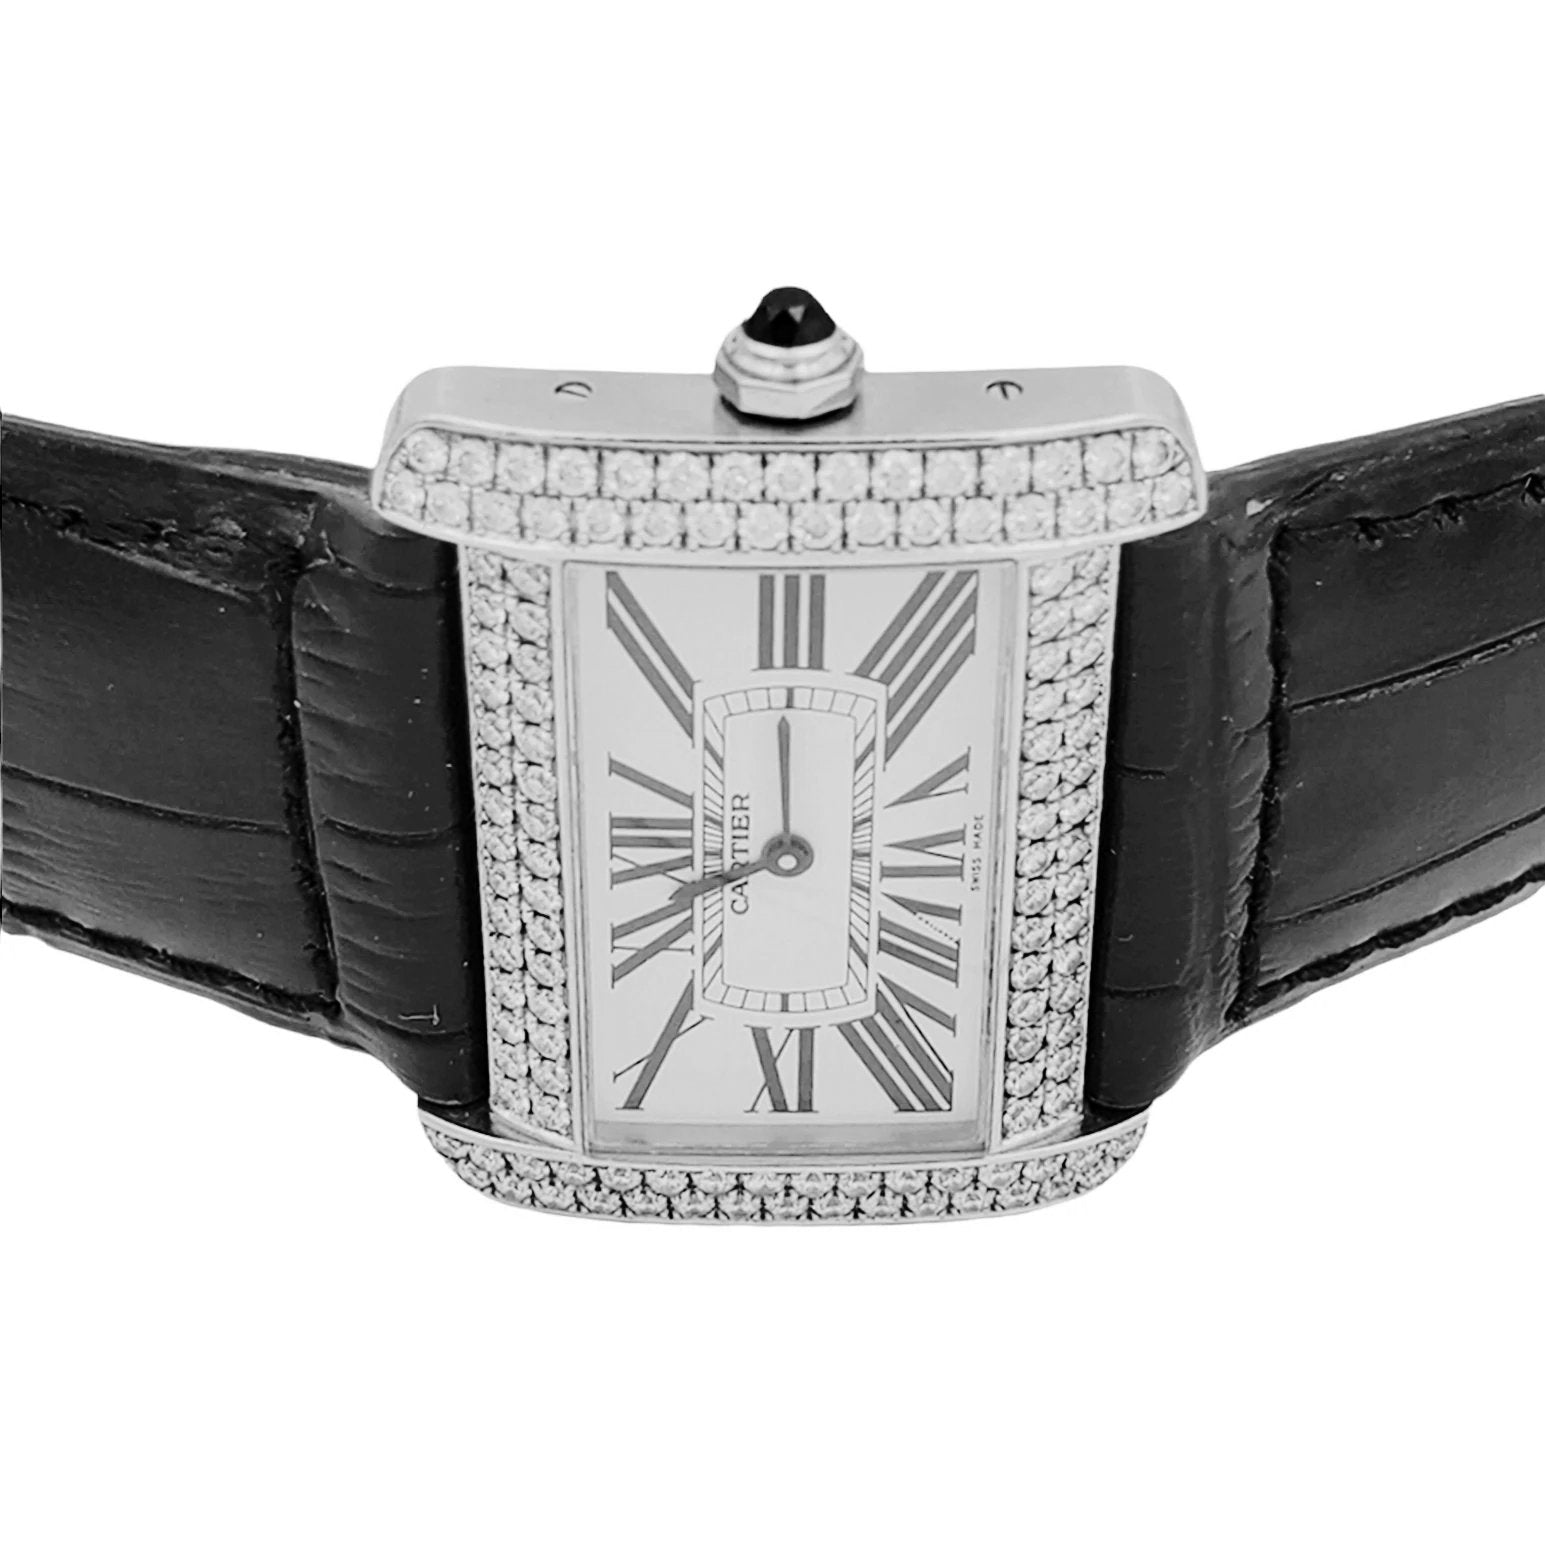 Ladies Cartier Divan Stainless Steel Watch with Leather Band and Diamond Bezel. (Pre-Owned WA301770)